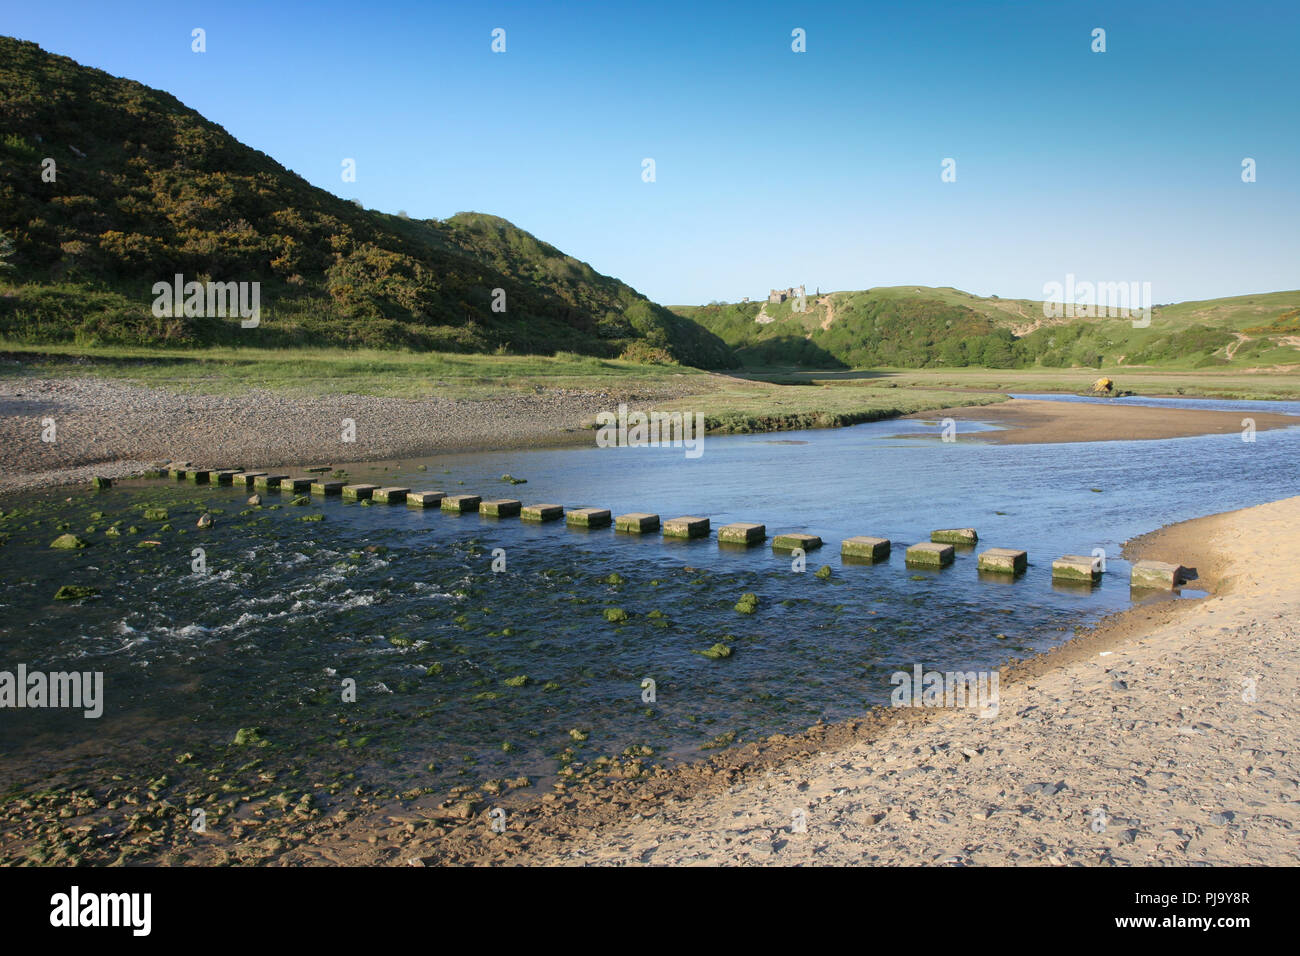 Stepping stones cross the stream at Three Cliffs Bay on the Gower peninsula near Swansea, Wles, UK, with Pennard Castle on the hillside in the backgro Stock Photo